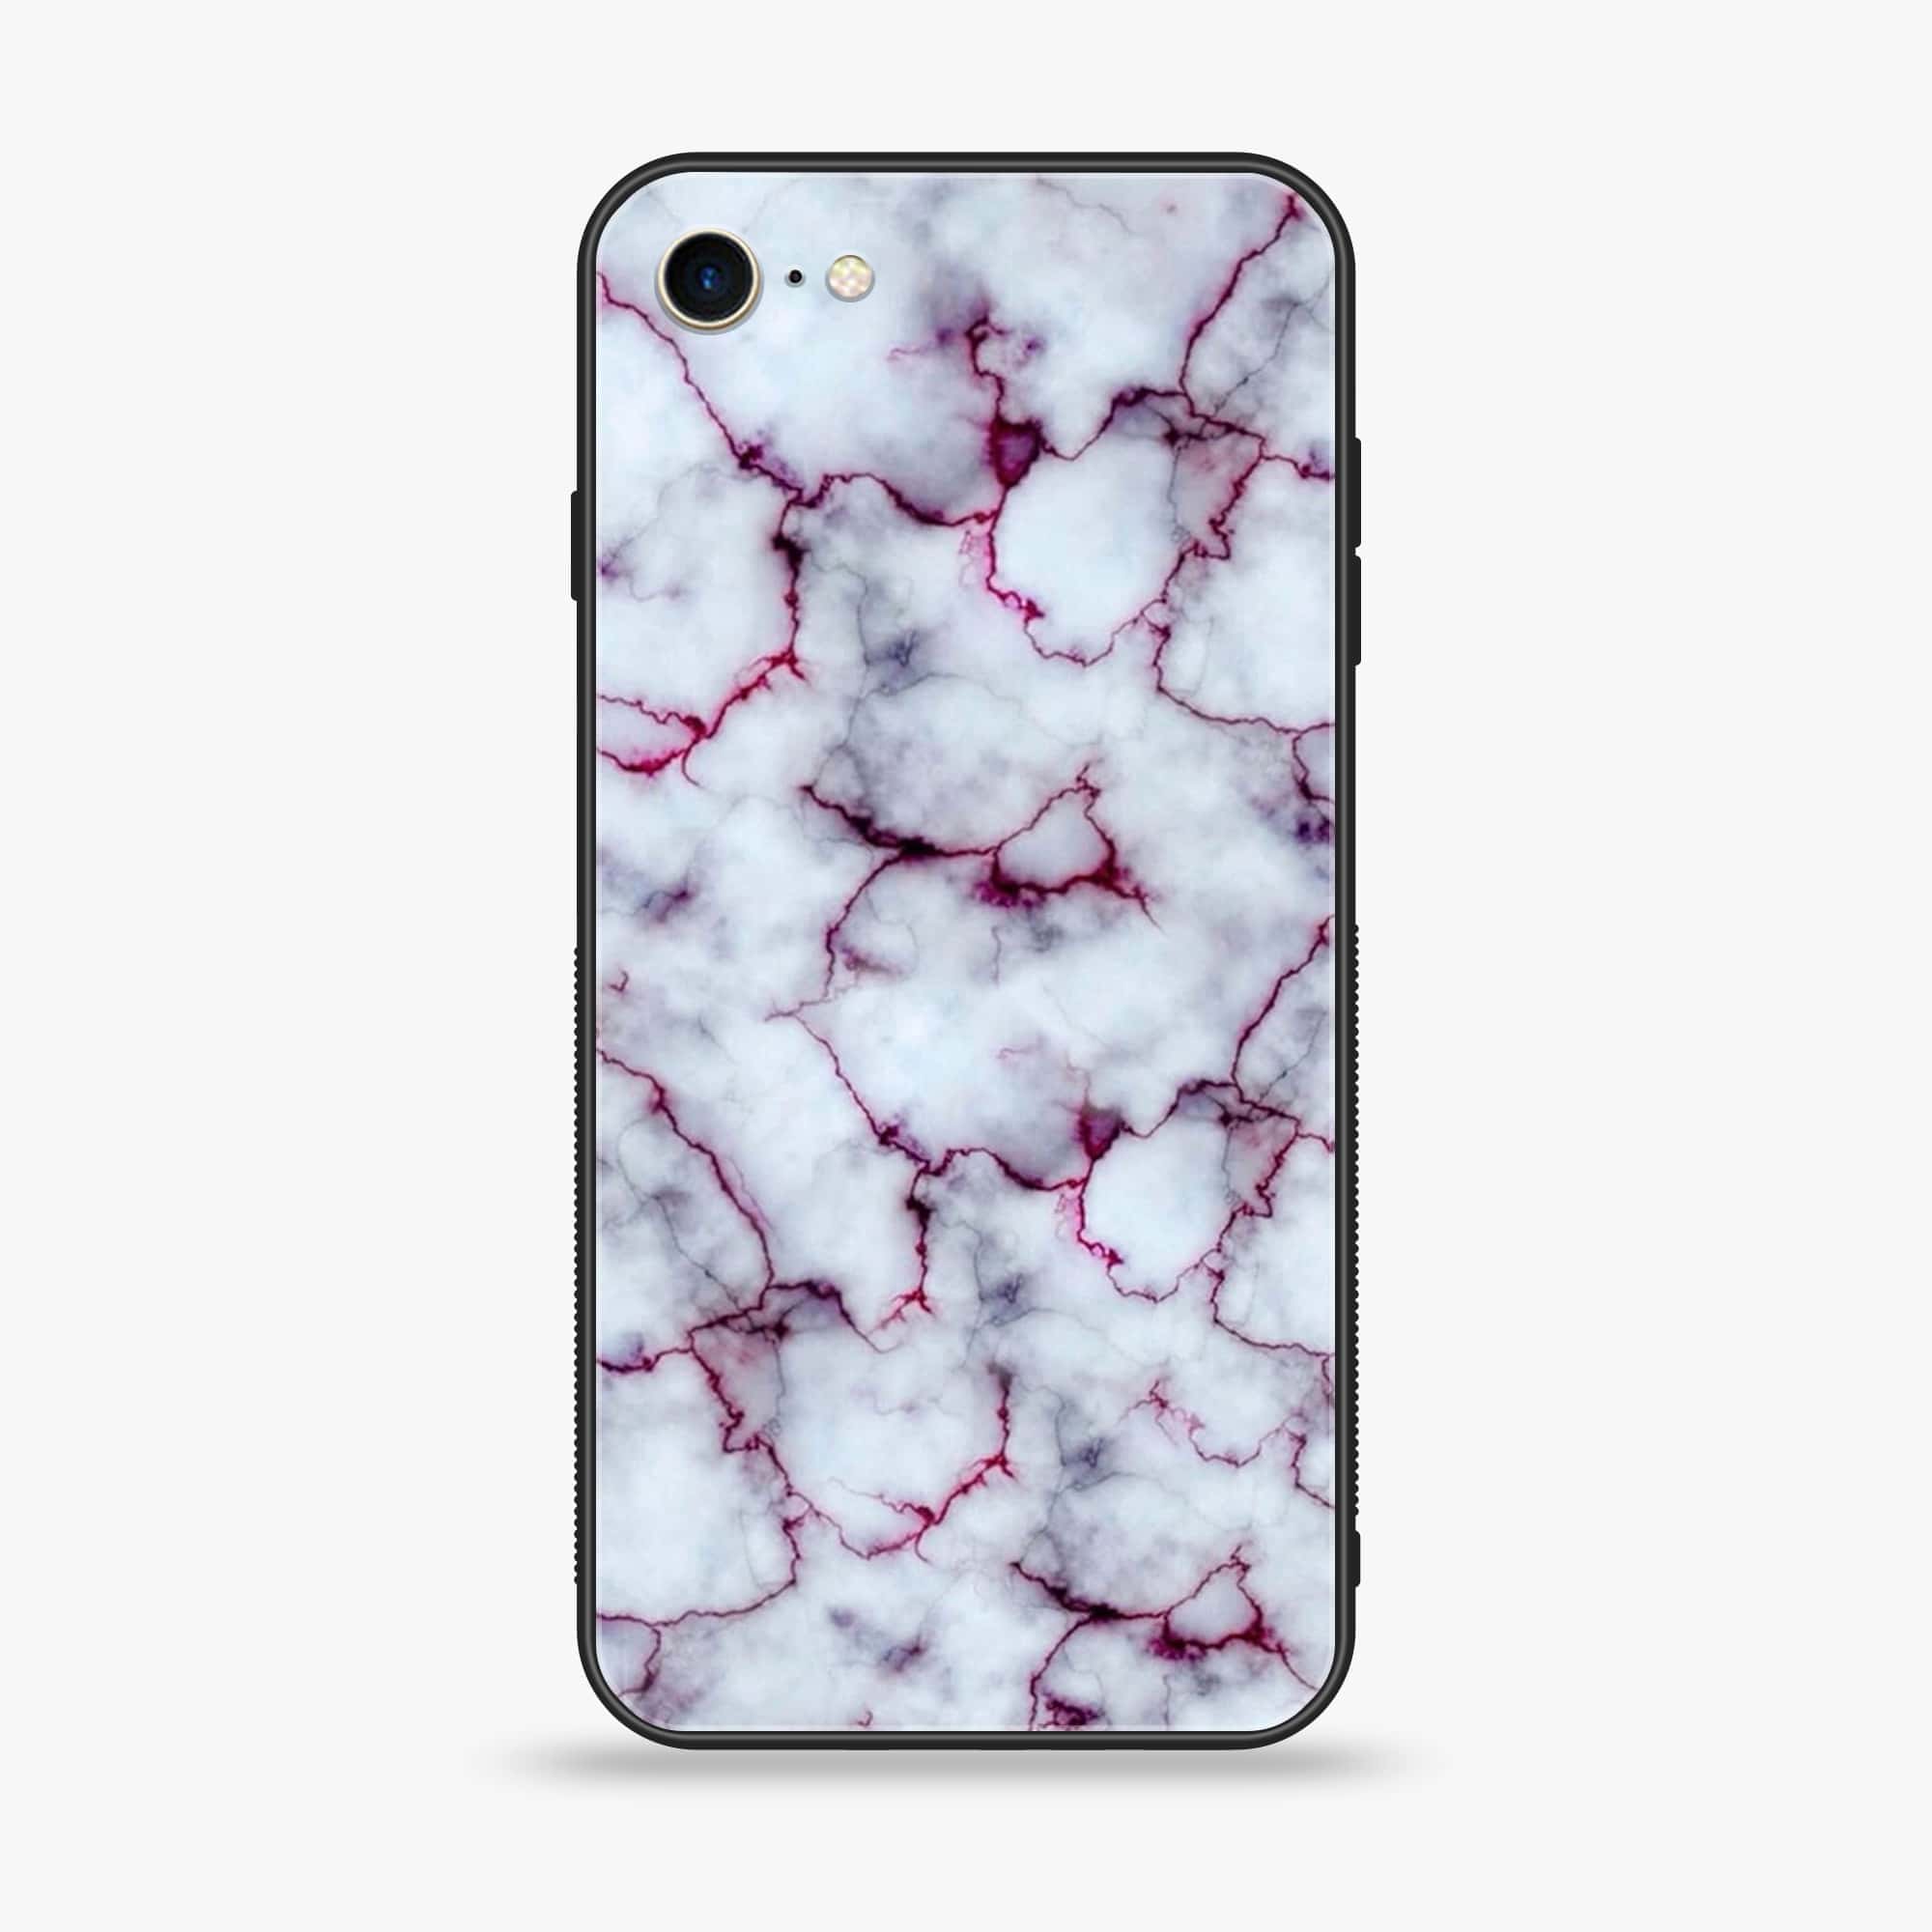 iPhone SE 2022 - White Marble Series - Premium Printed Glass soft Bumper shock Proof Case